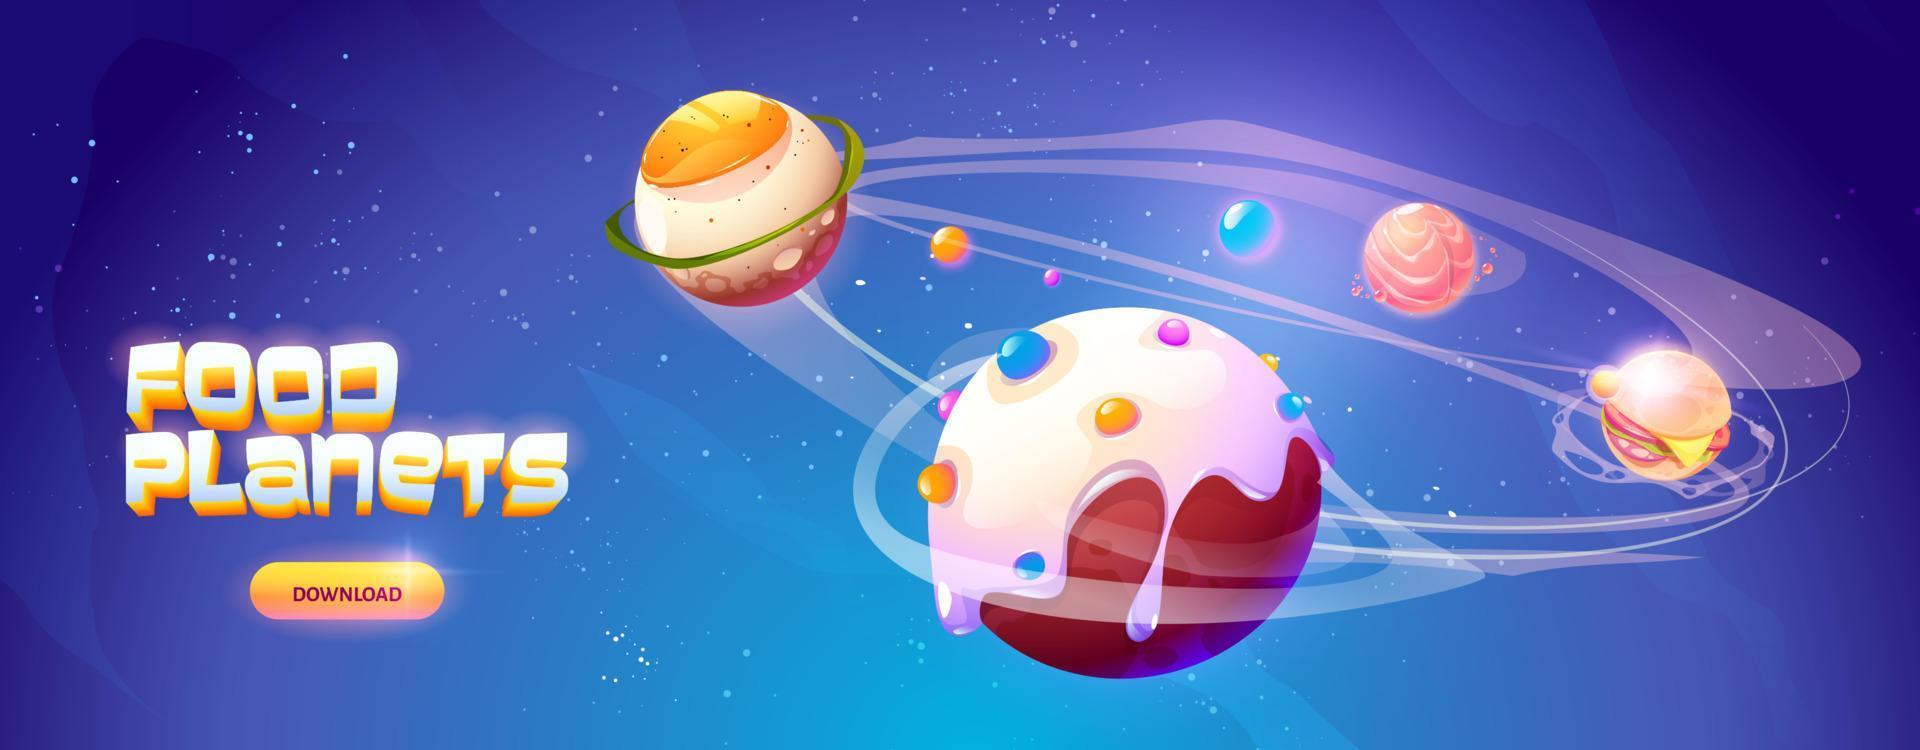 Food planets banner of space arcade game vector